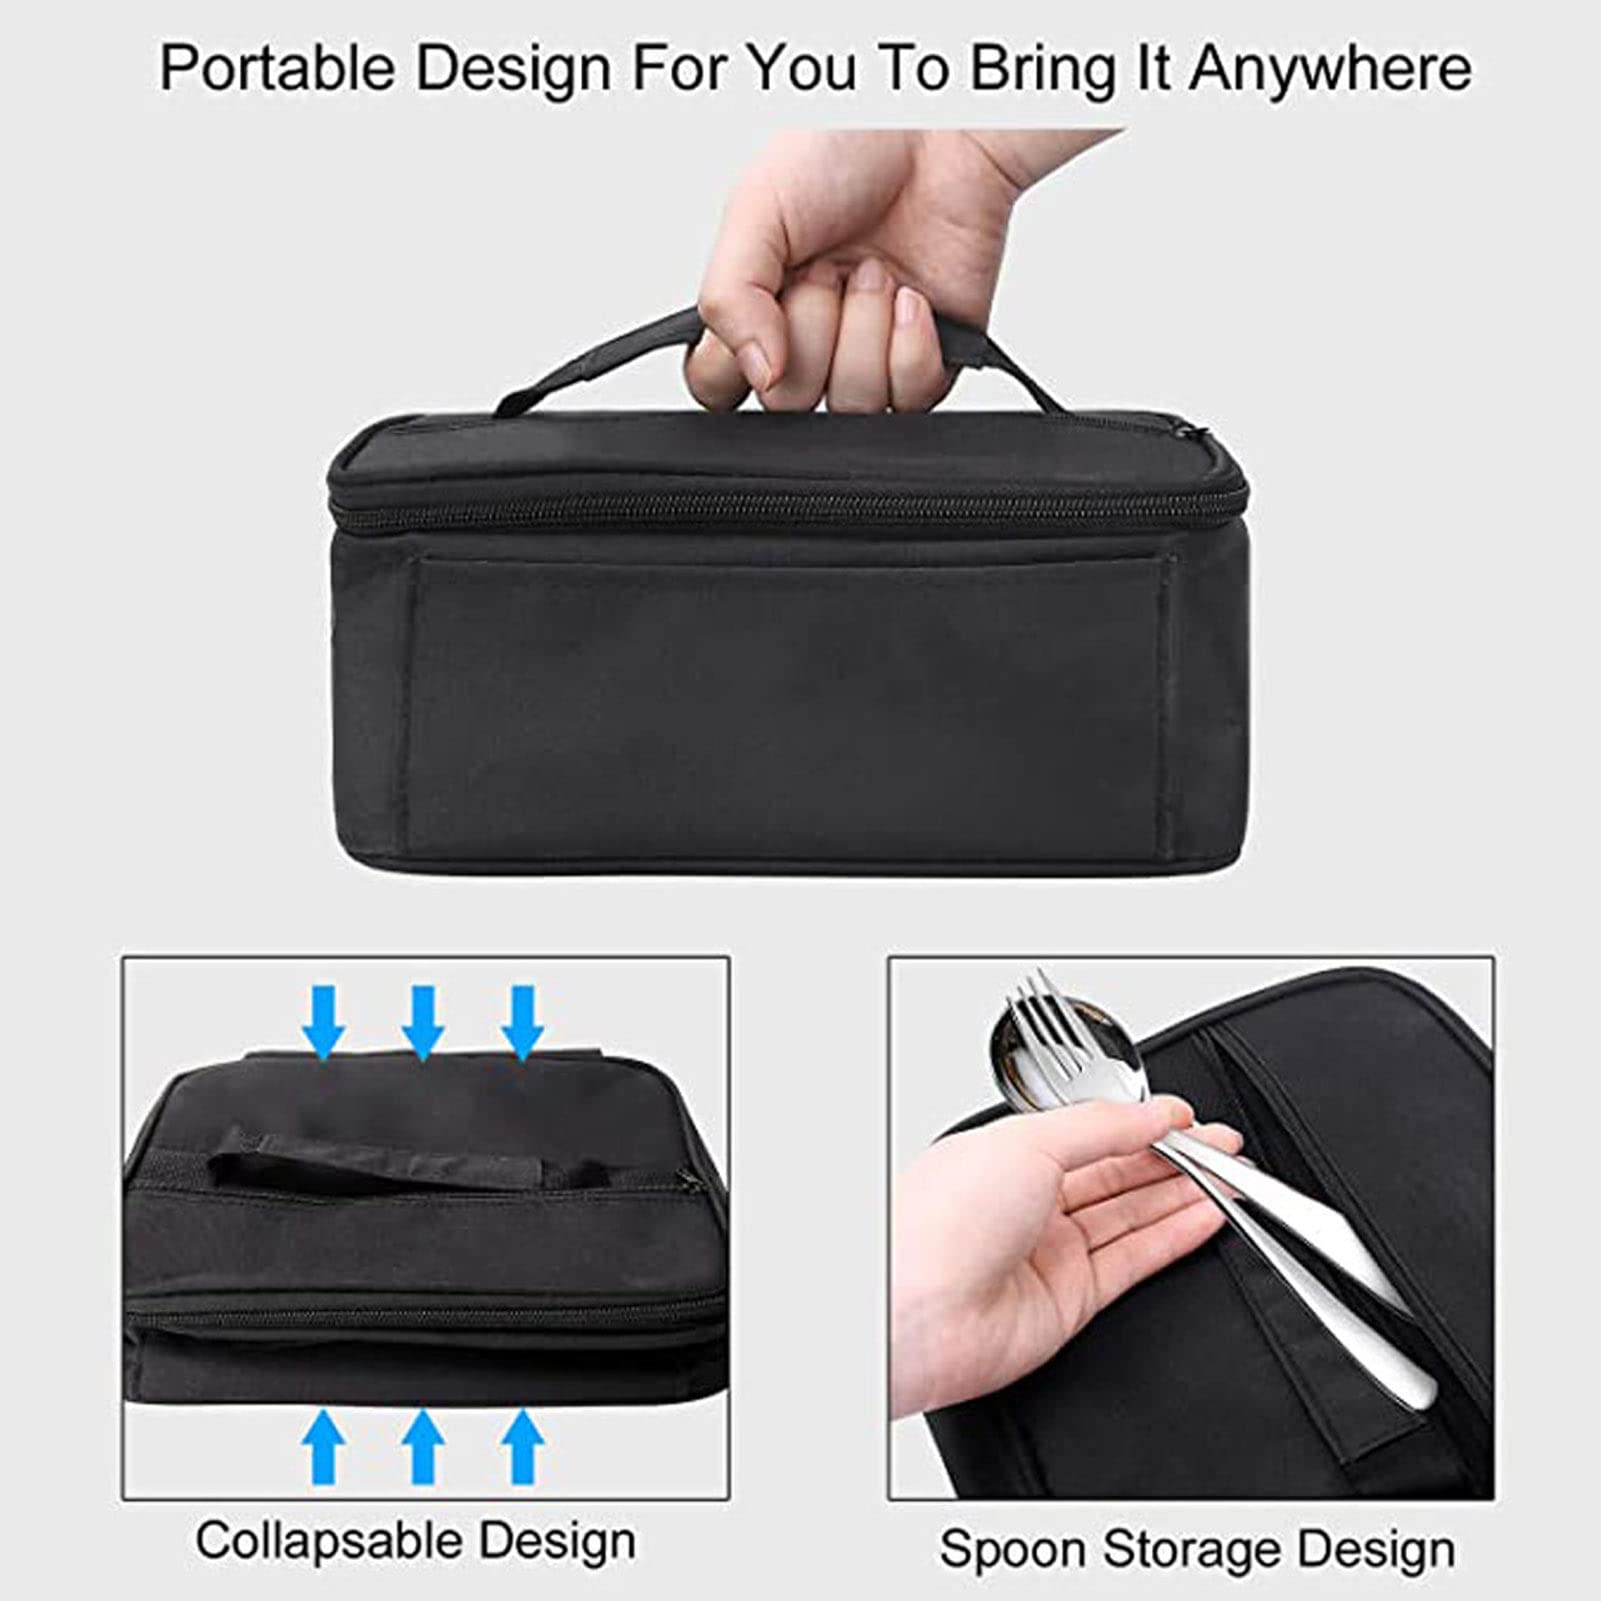 YOUTHINK Heating Lunch Bag, Food Warmer Portable Food Warmer Lunch Box Insulation Heating Electronic Food Pack for Trip Outdoor Traveling(Black)